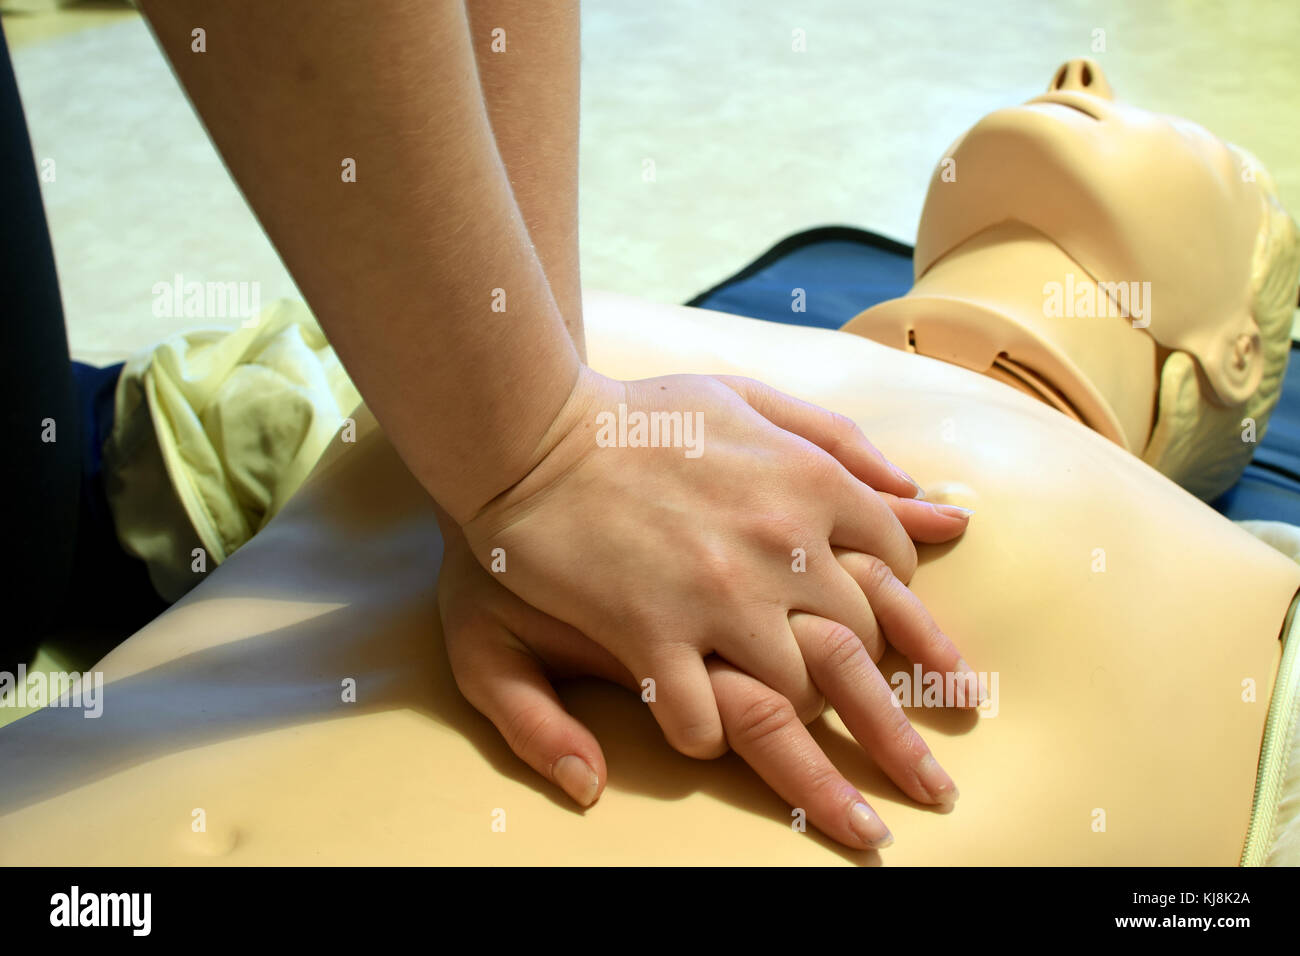 CPR training with CPR dummy. First aid resuscitation concept. Stock Photo